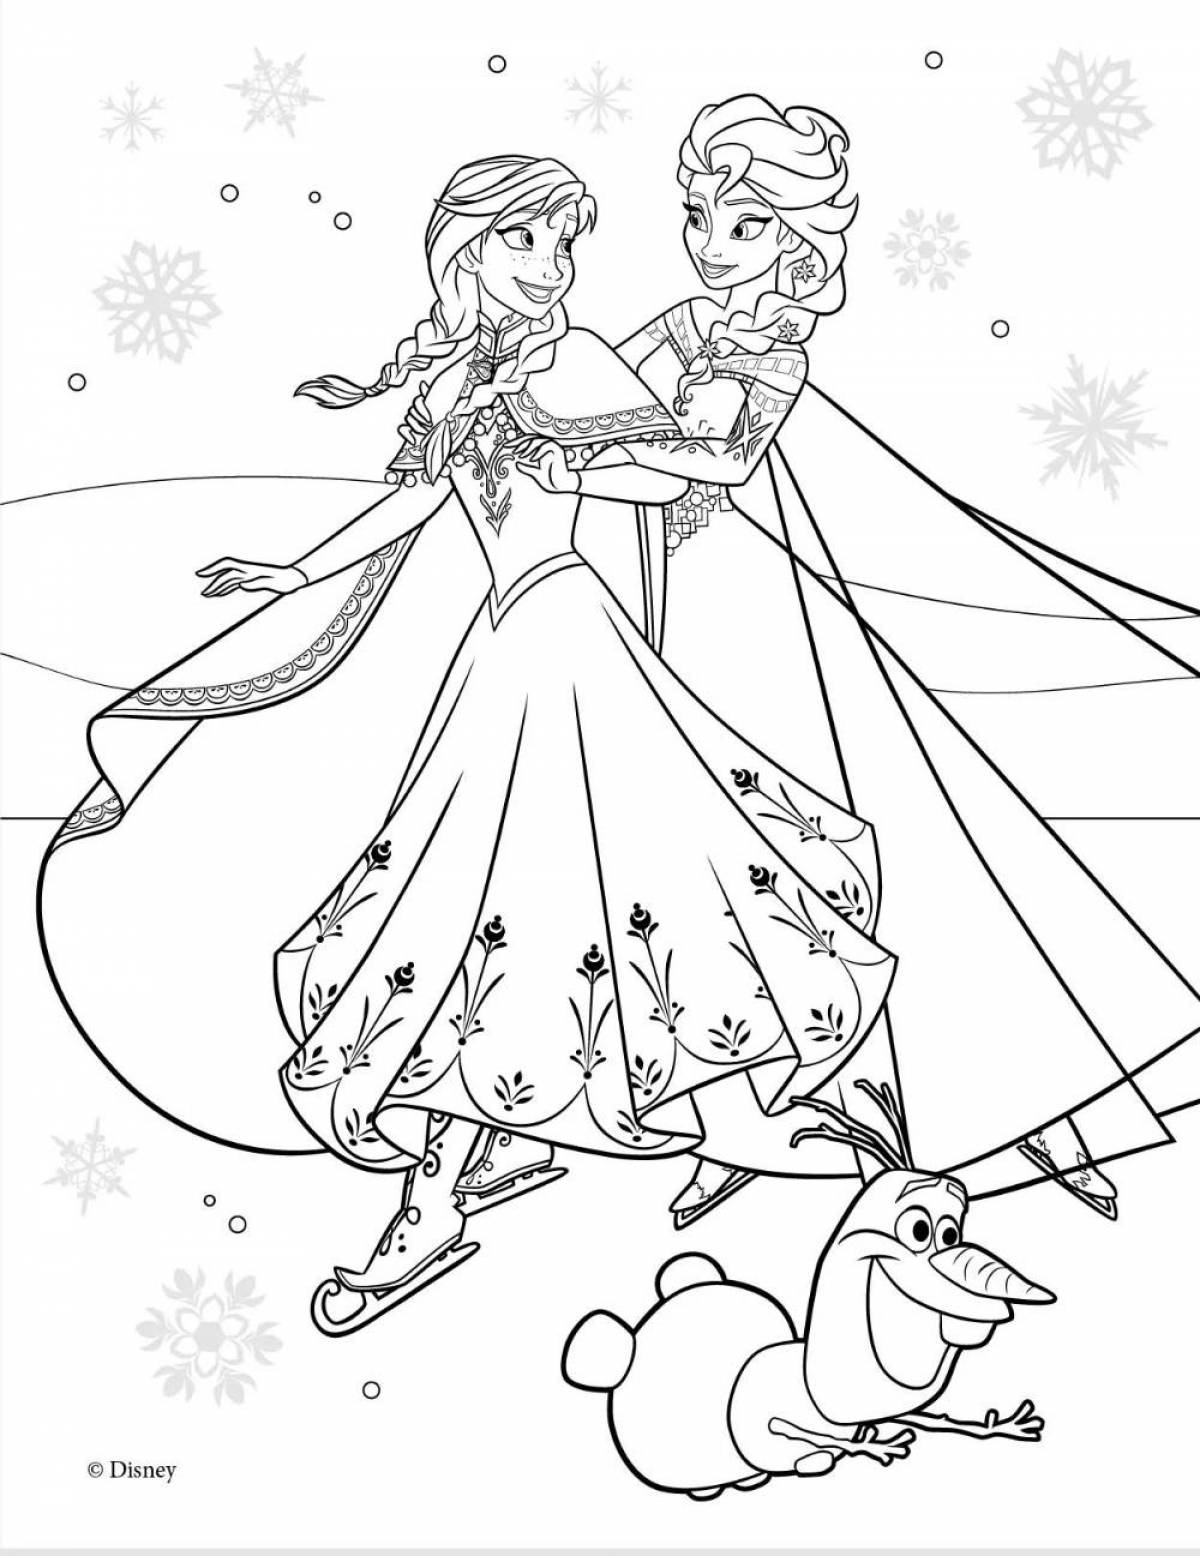 Elsa and anna bright coloring for kids